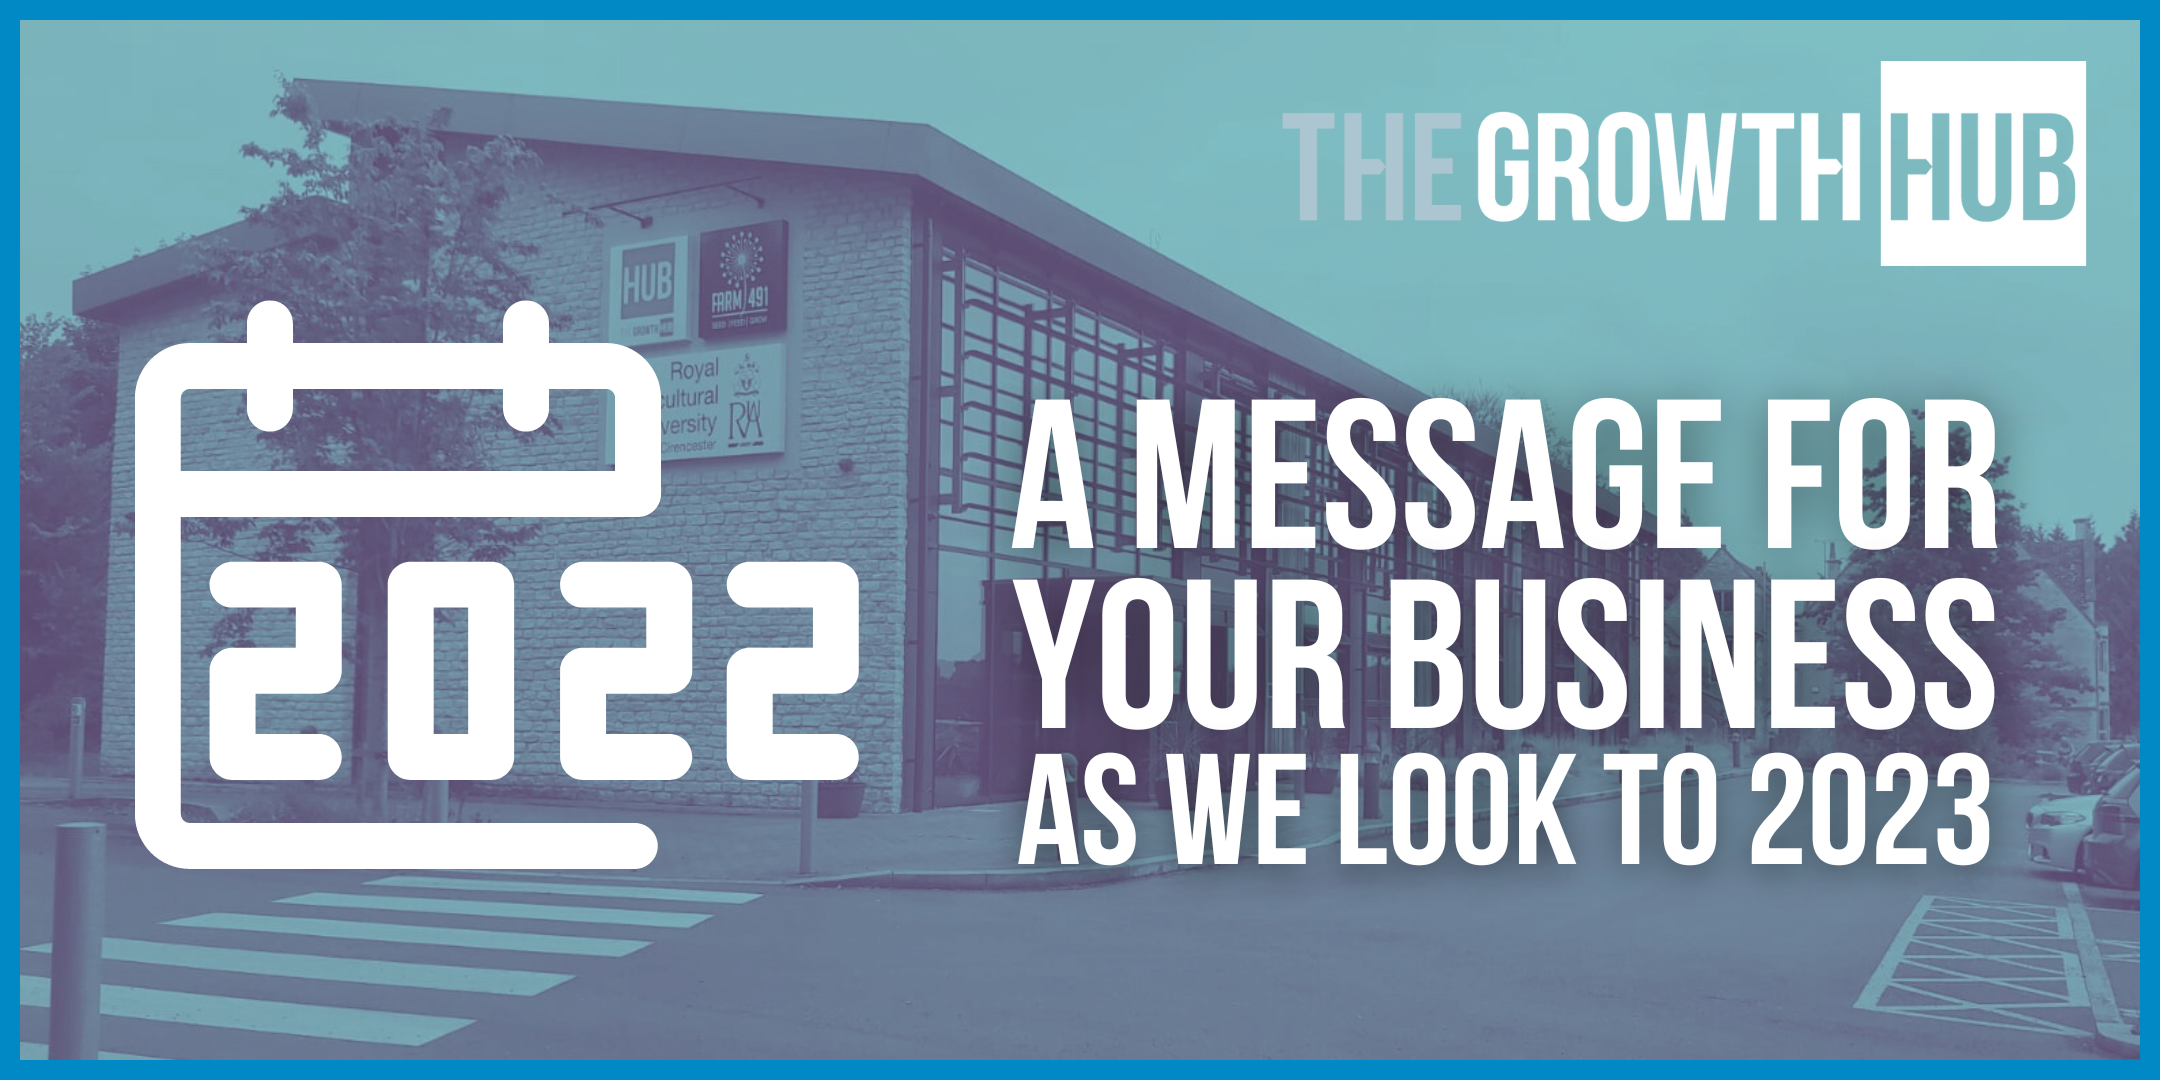 A message for your business from the Gloucestershire Growth Hub Network